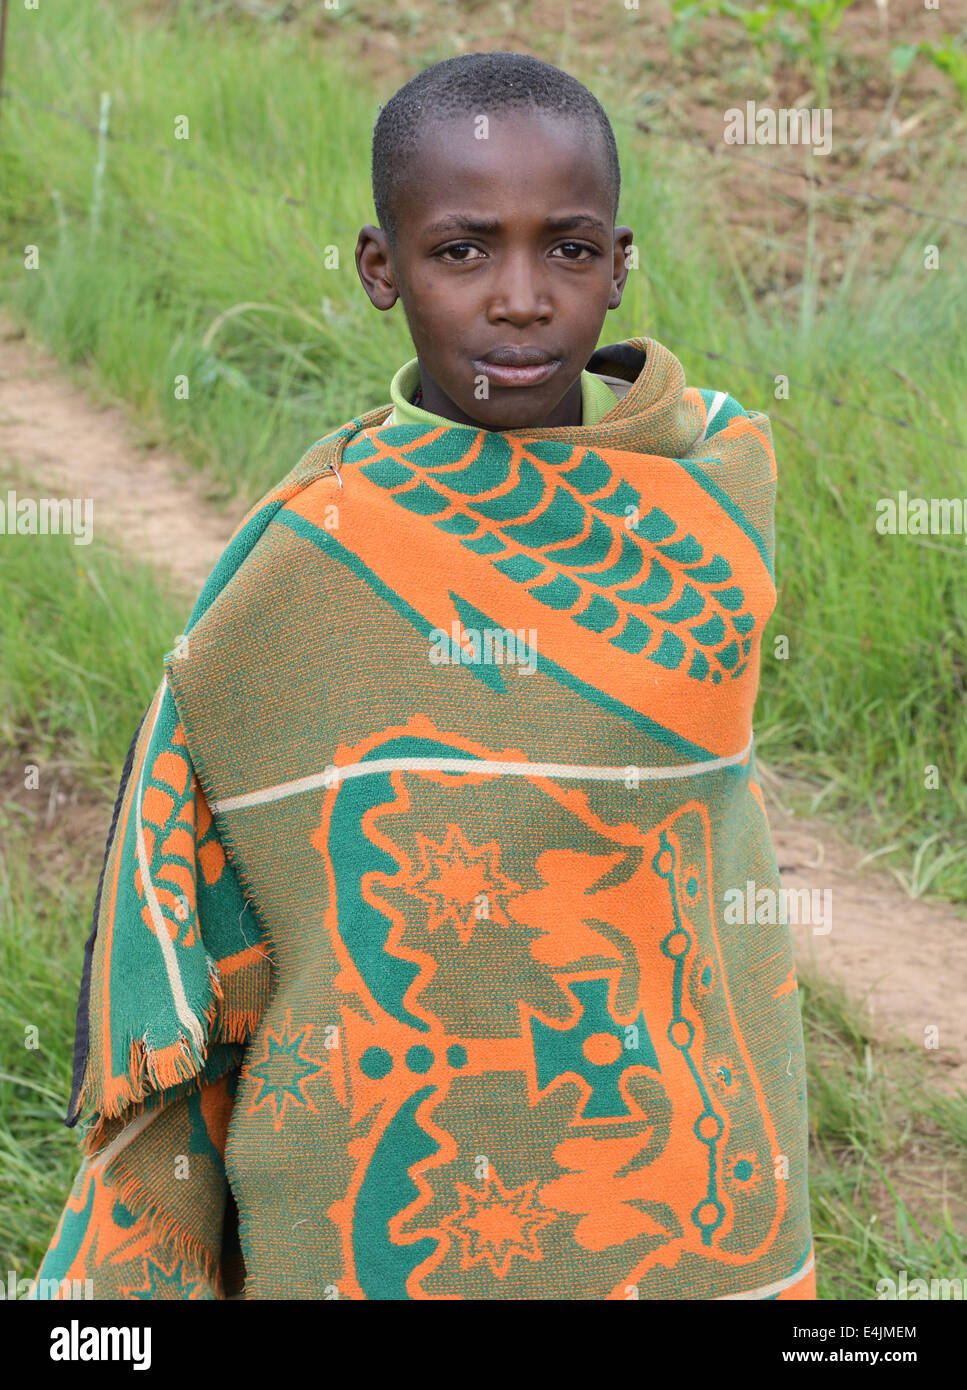 Butha-Buthe, Lesotho - December 17, 2012. A local Basotho boy in traditional garb. Also known as the Blanket People, they are re Stock Photo